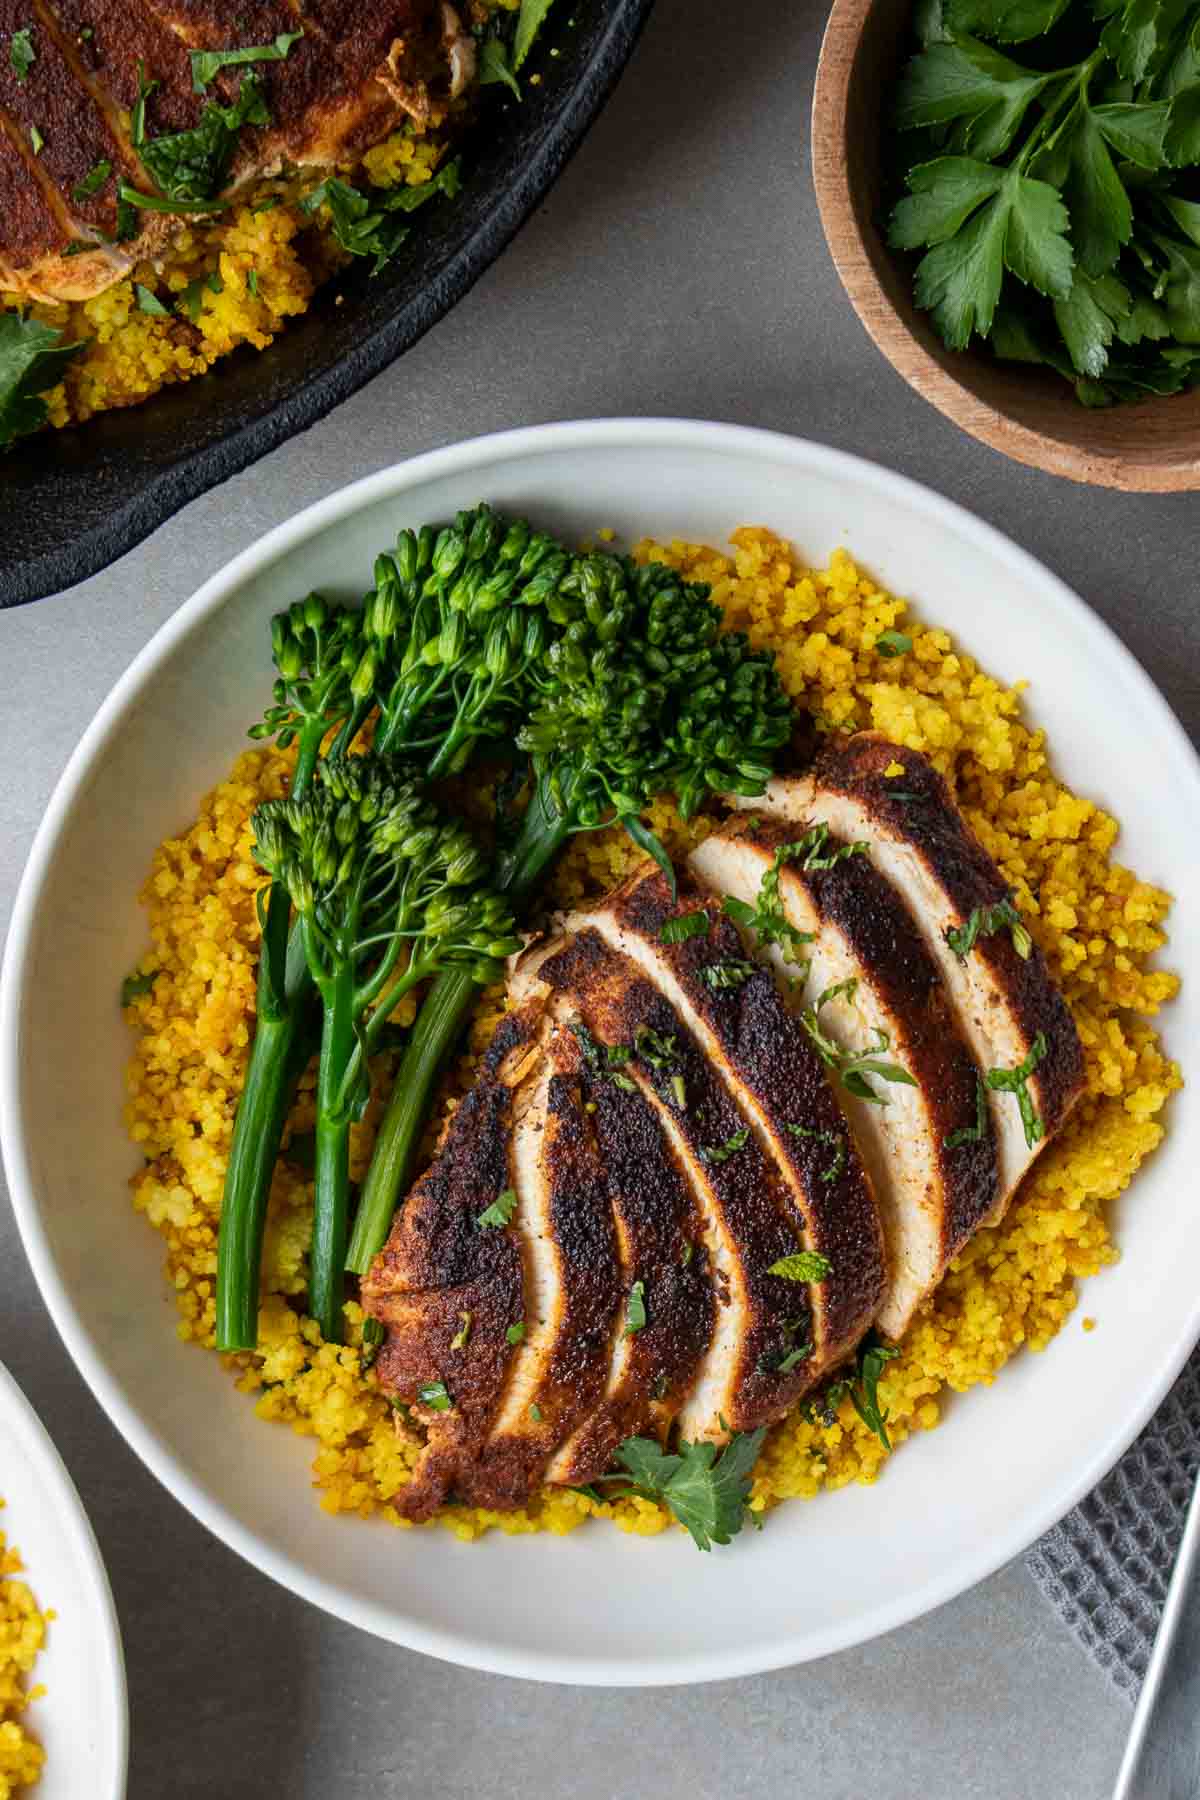 Bowl of golden couscous with sliced chicken with Moroccan spices and broccolini